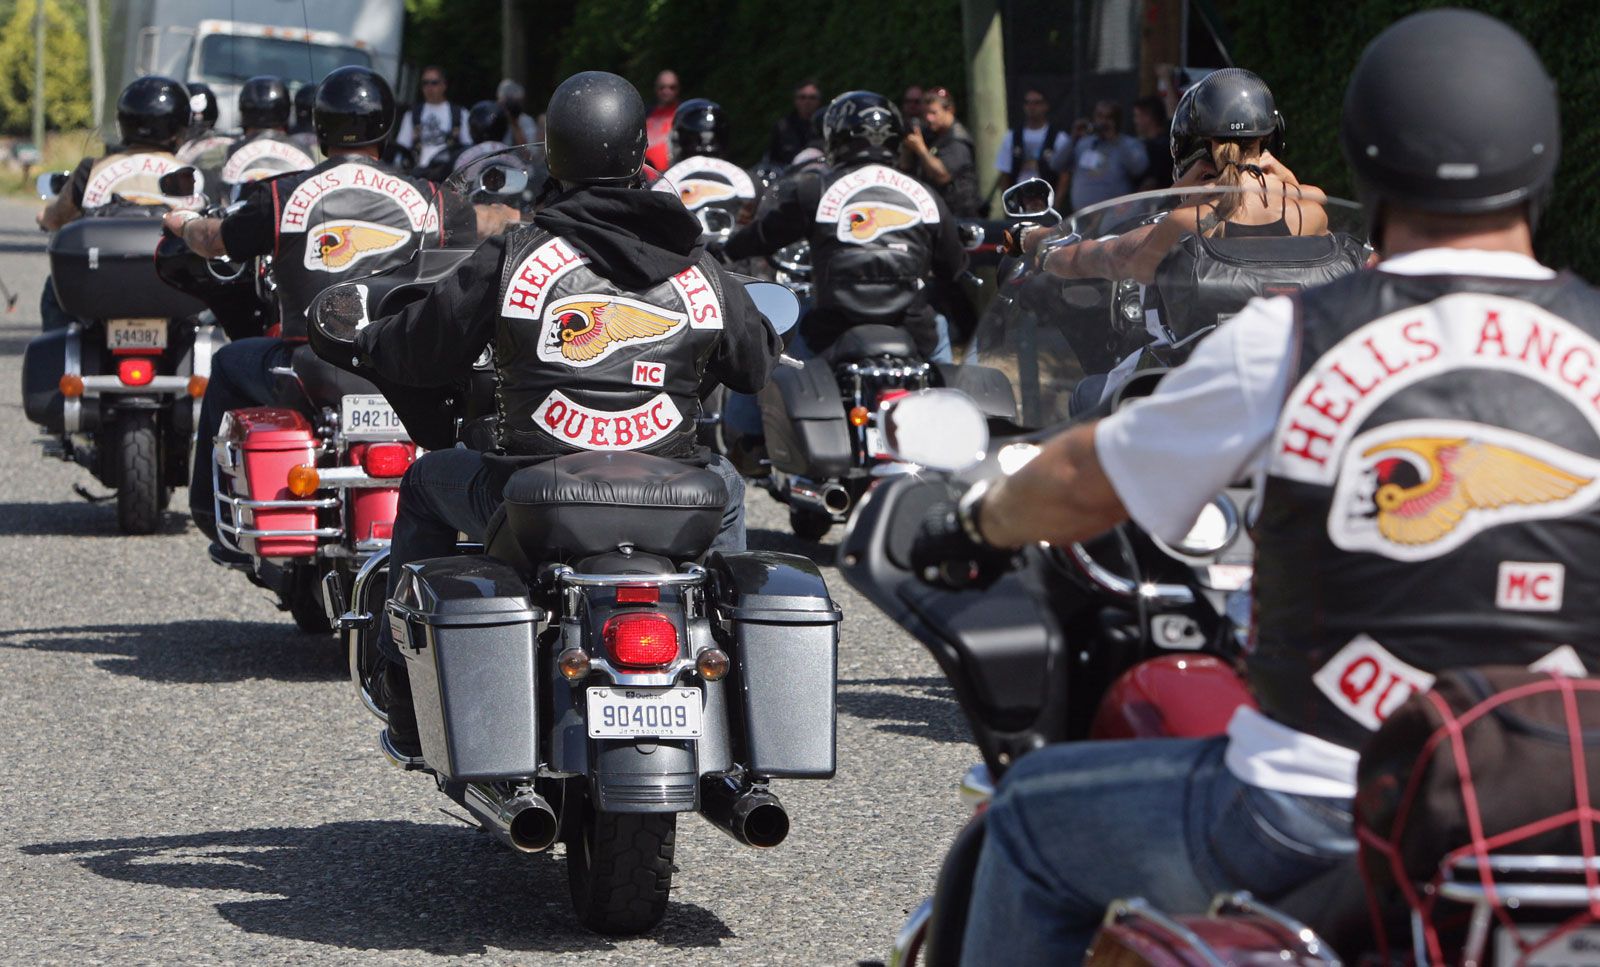 The history of the Hell Angels